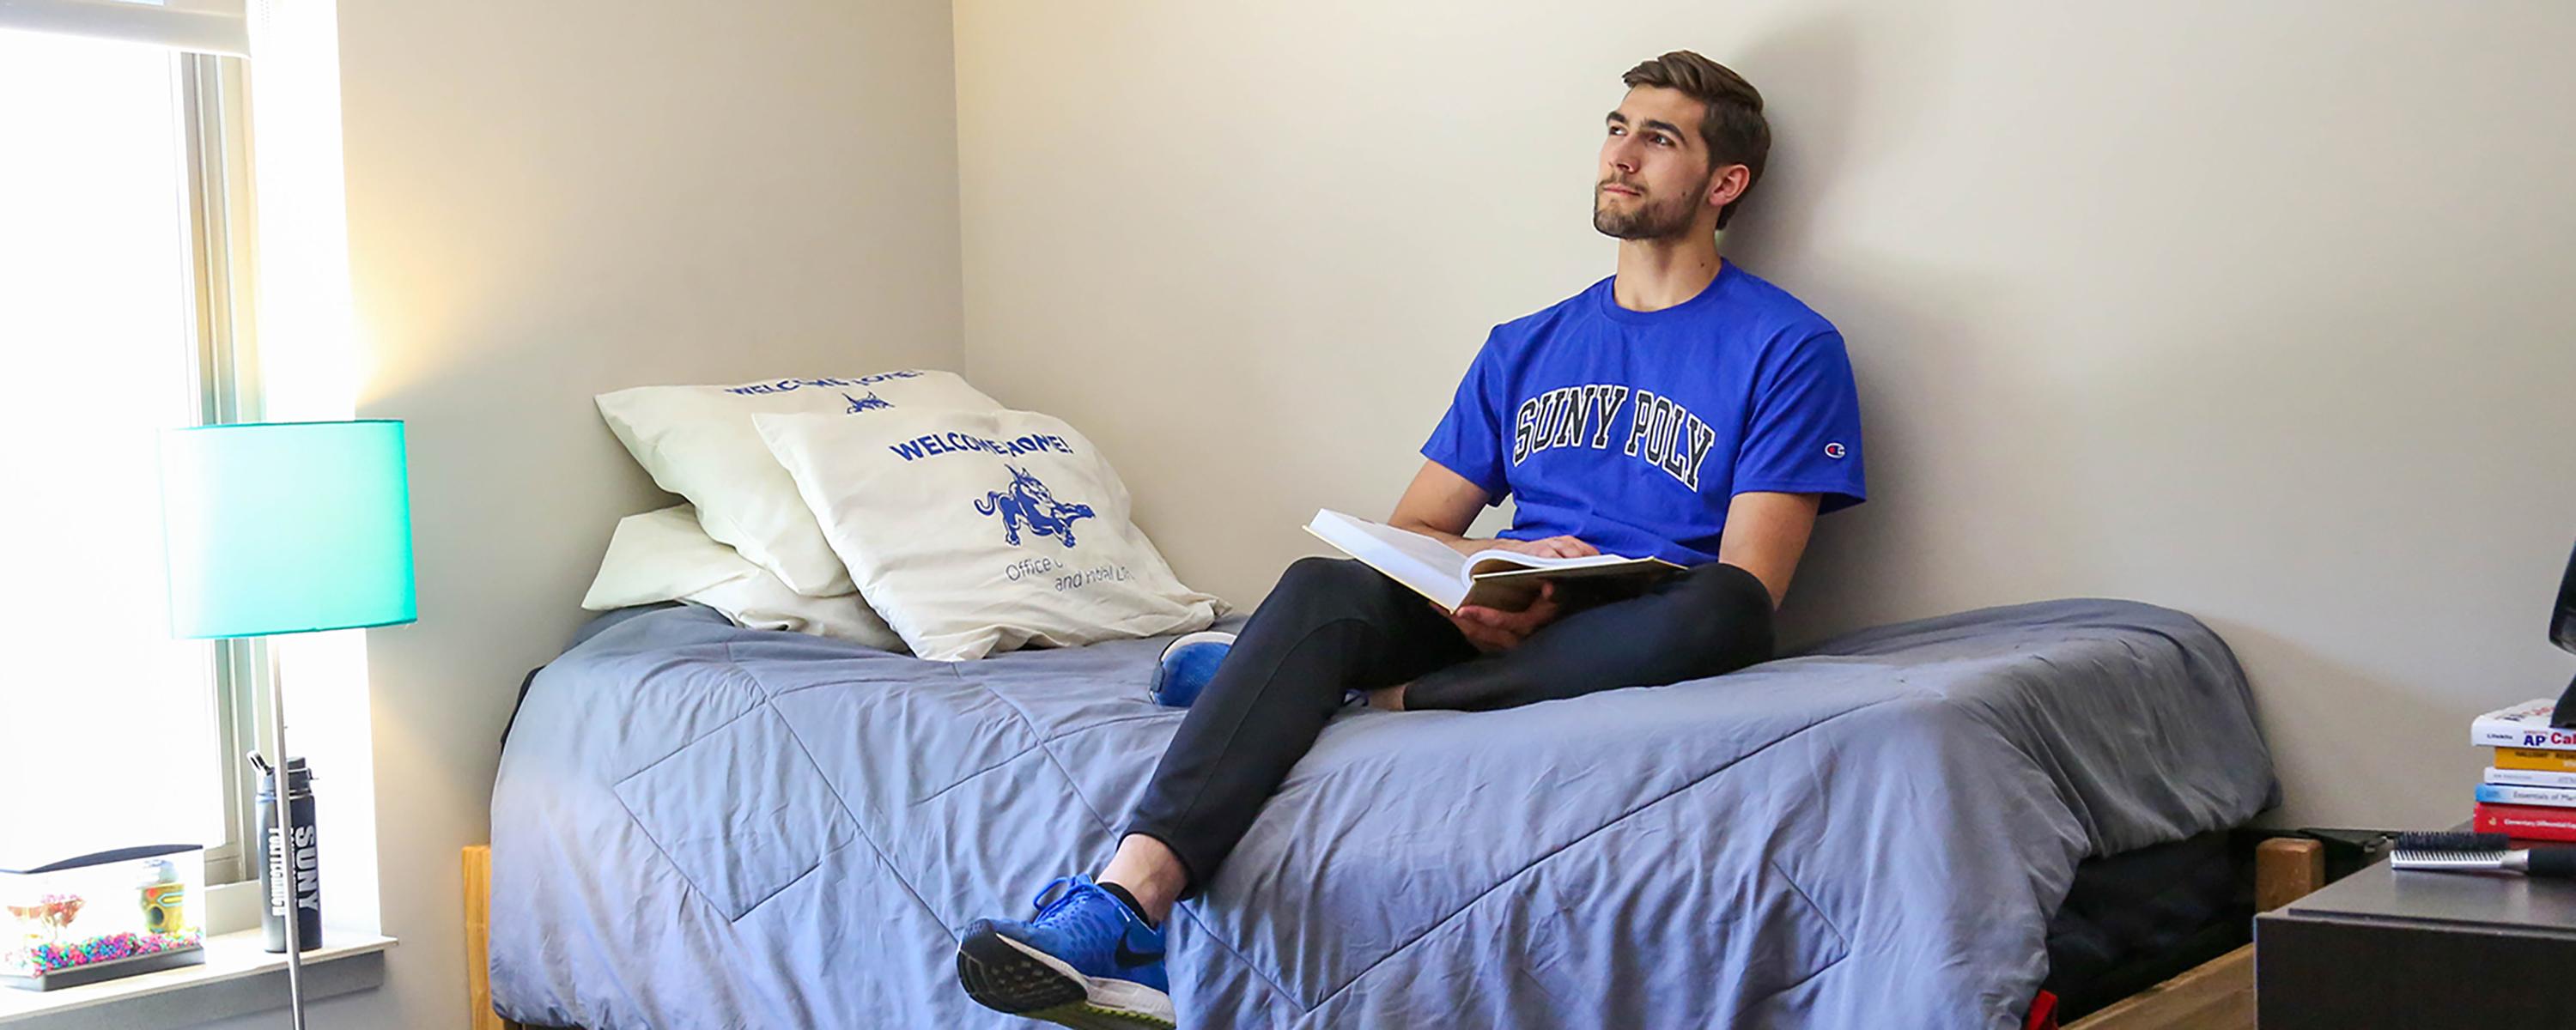 image of student in Dorm room